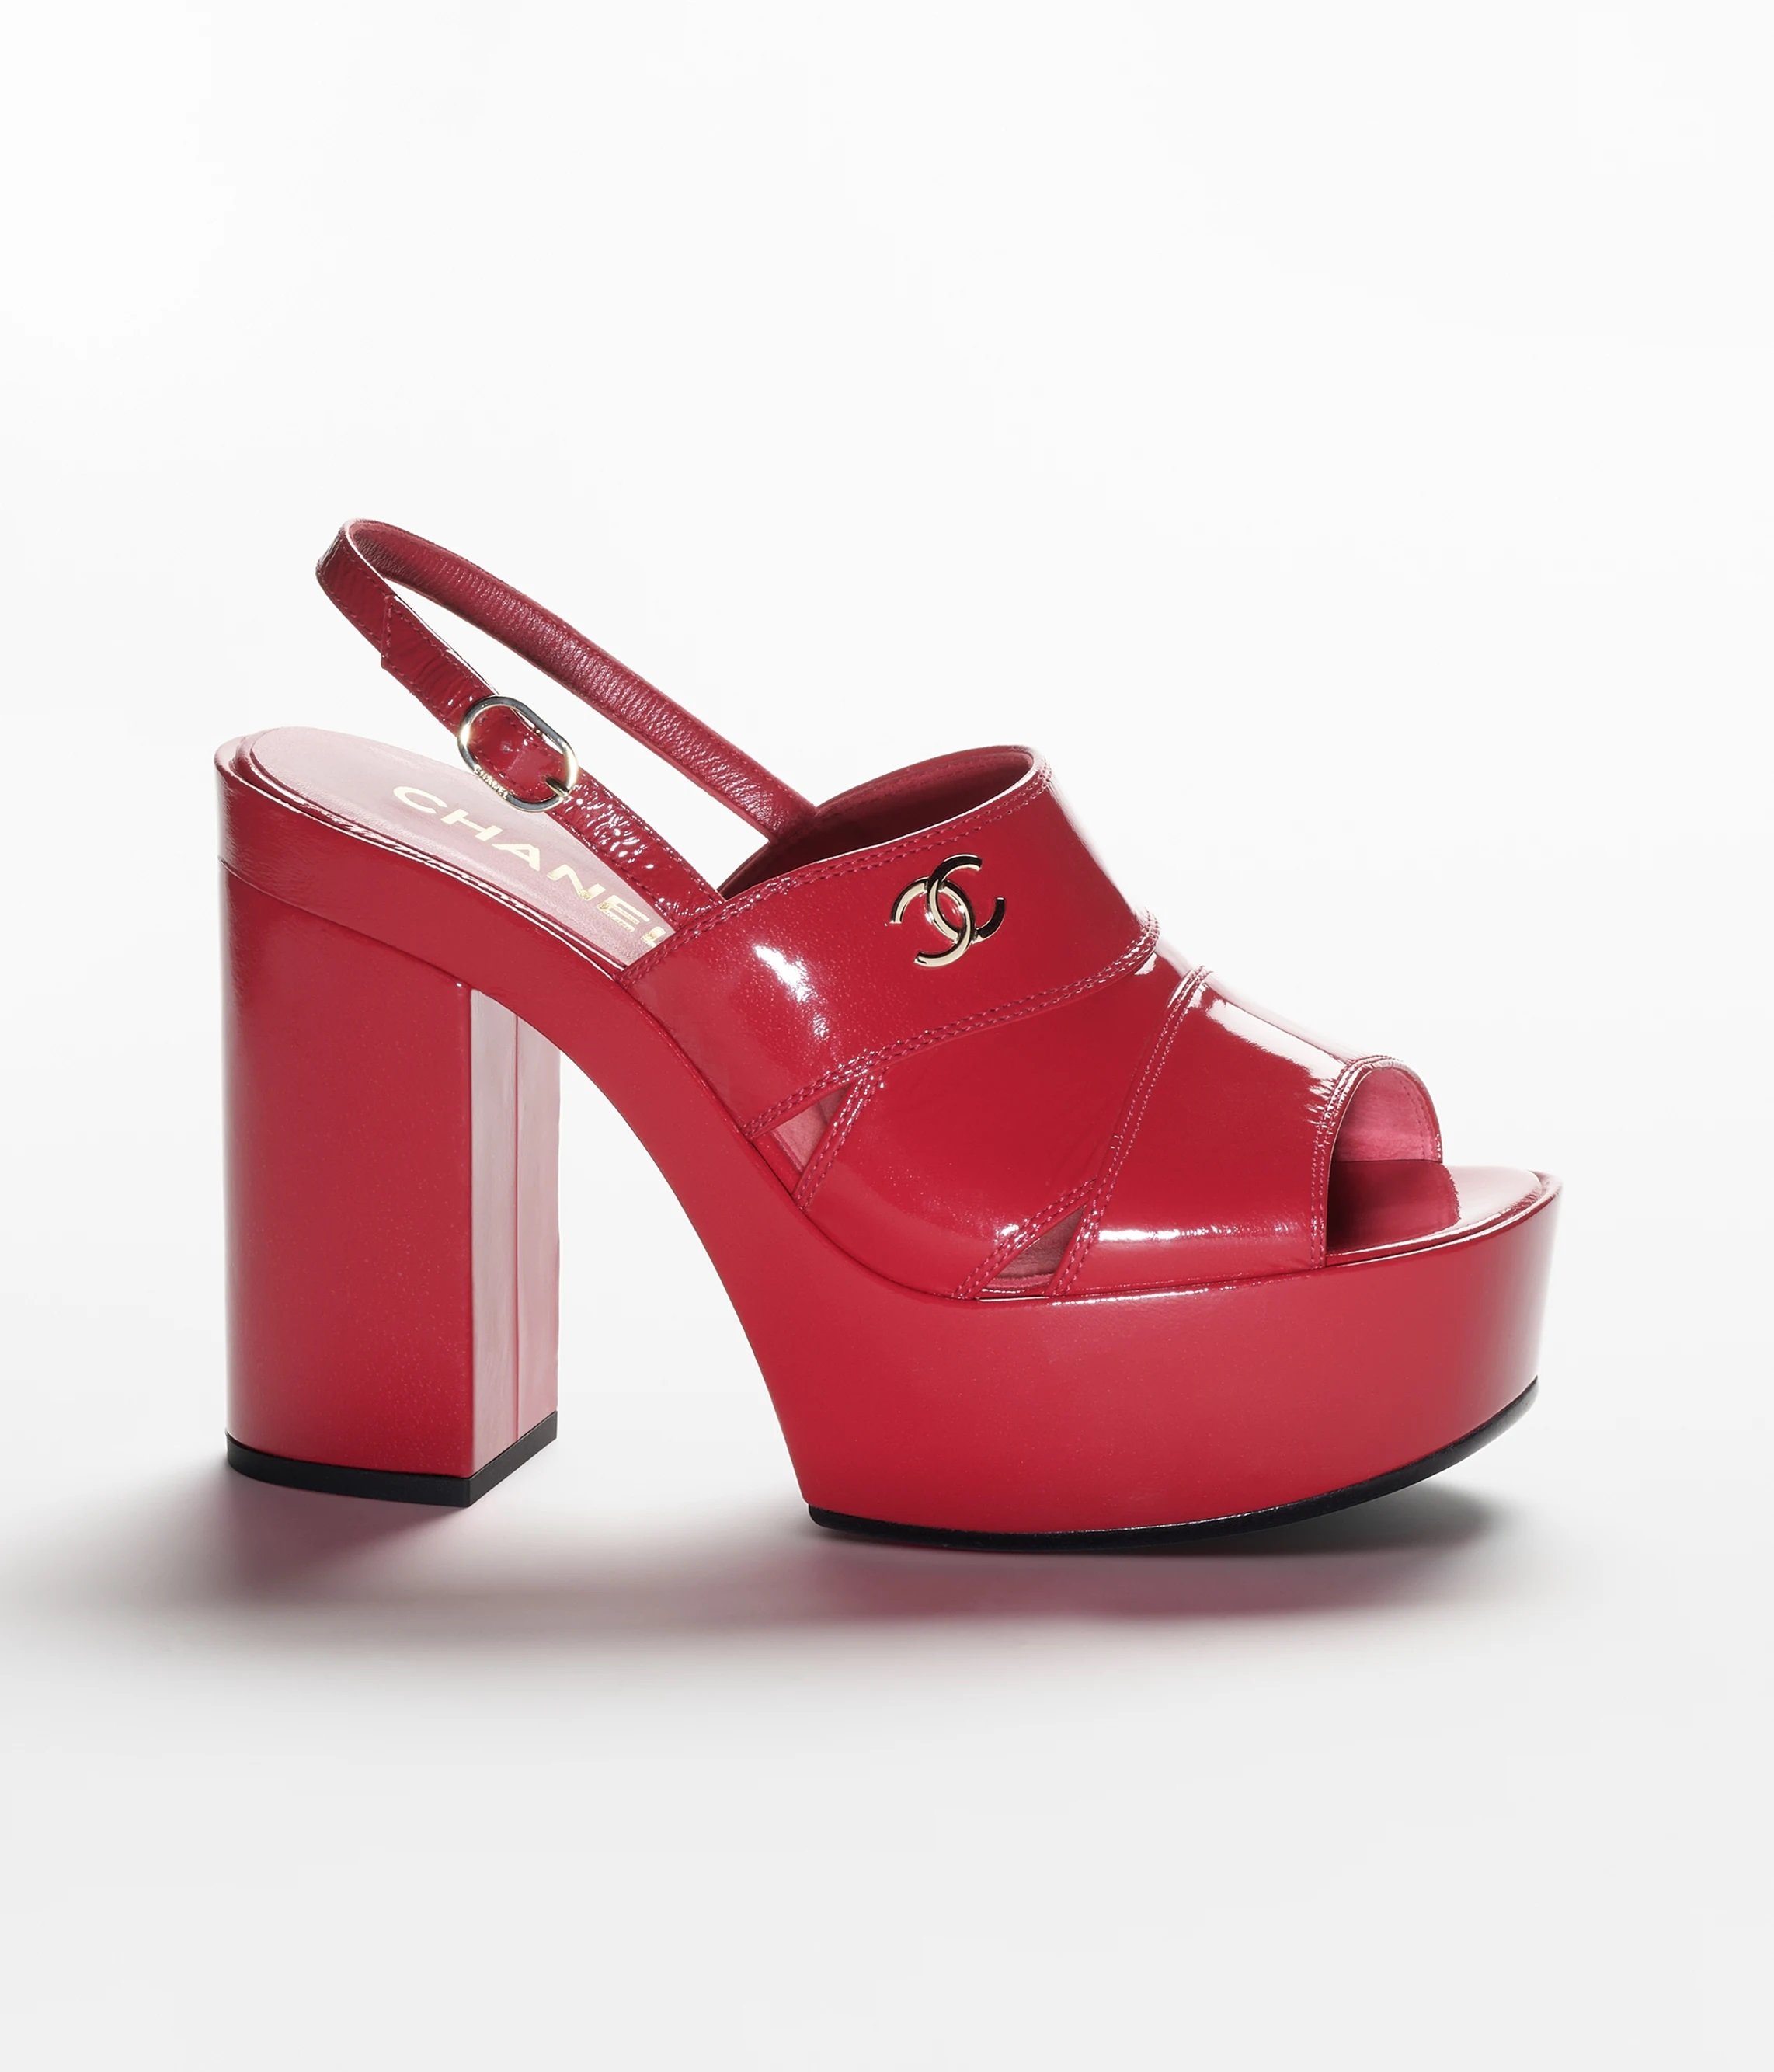 Chanel Slingback Platform Sandals in Red Patent Leather — UFO No More